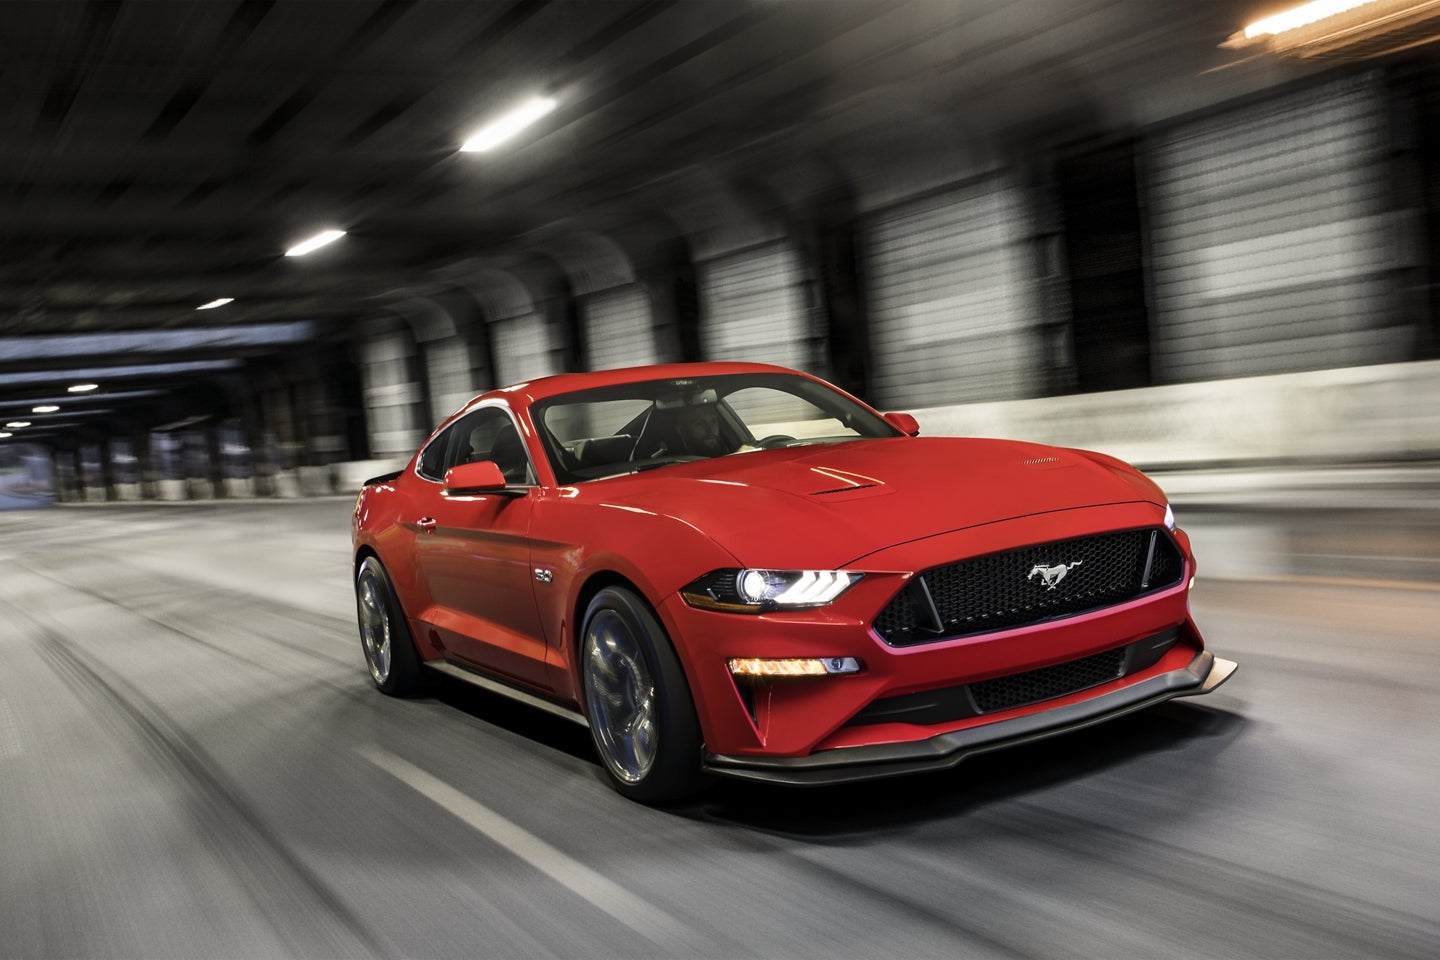 2020 Ford Mustang for Sale near Abbeville, AL